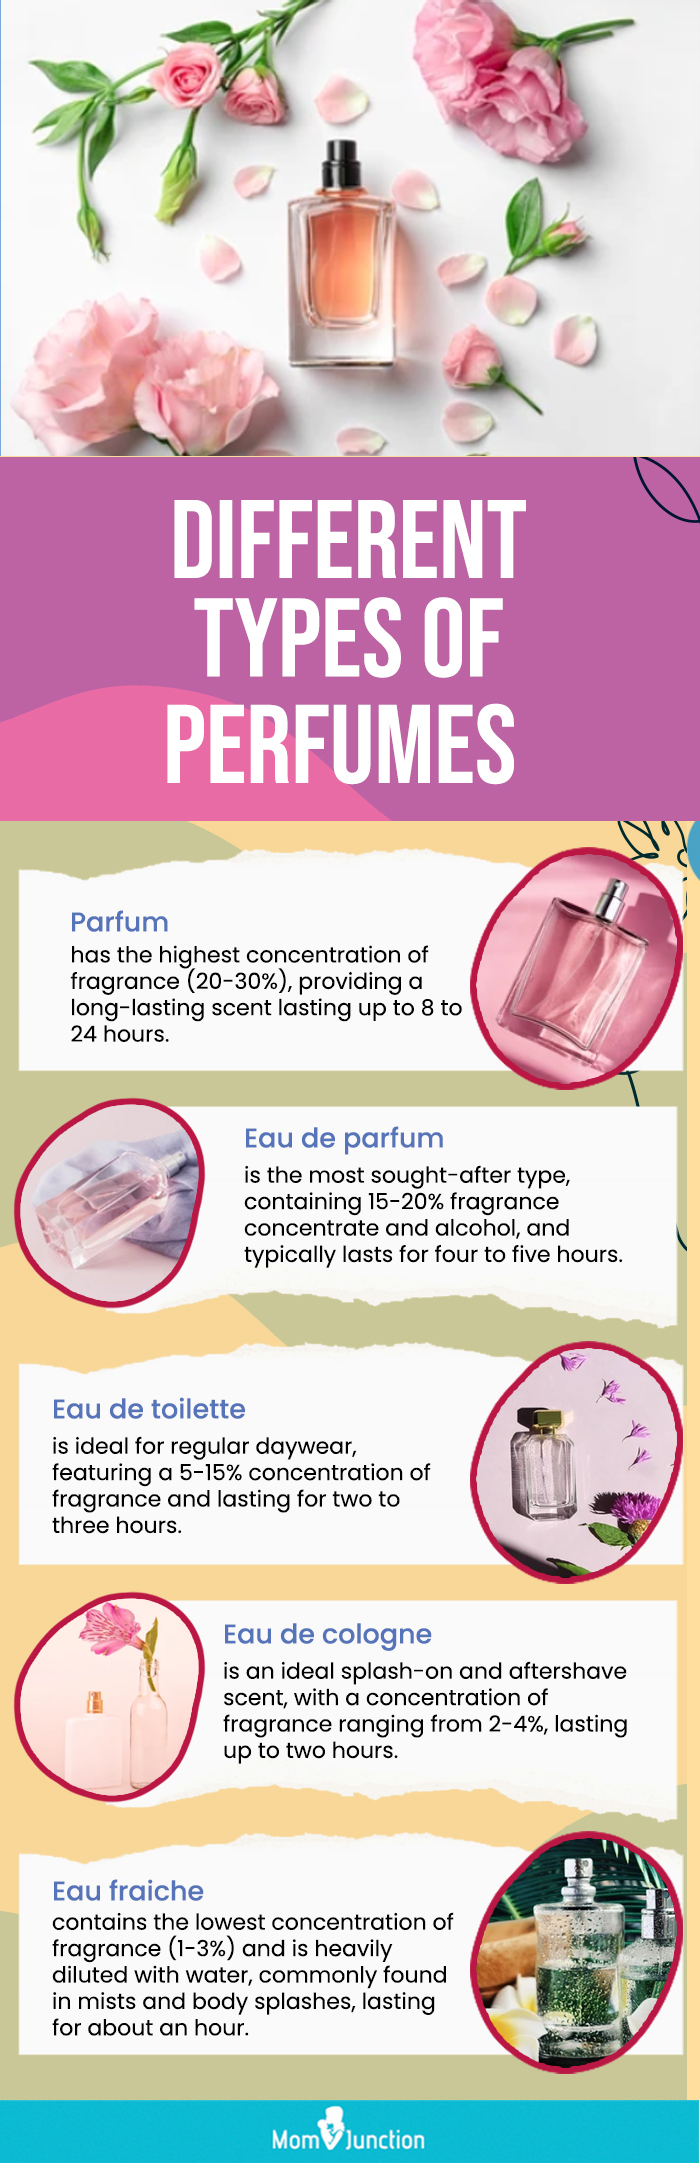 Different Types Of Perfumes (infographic)